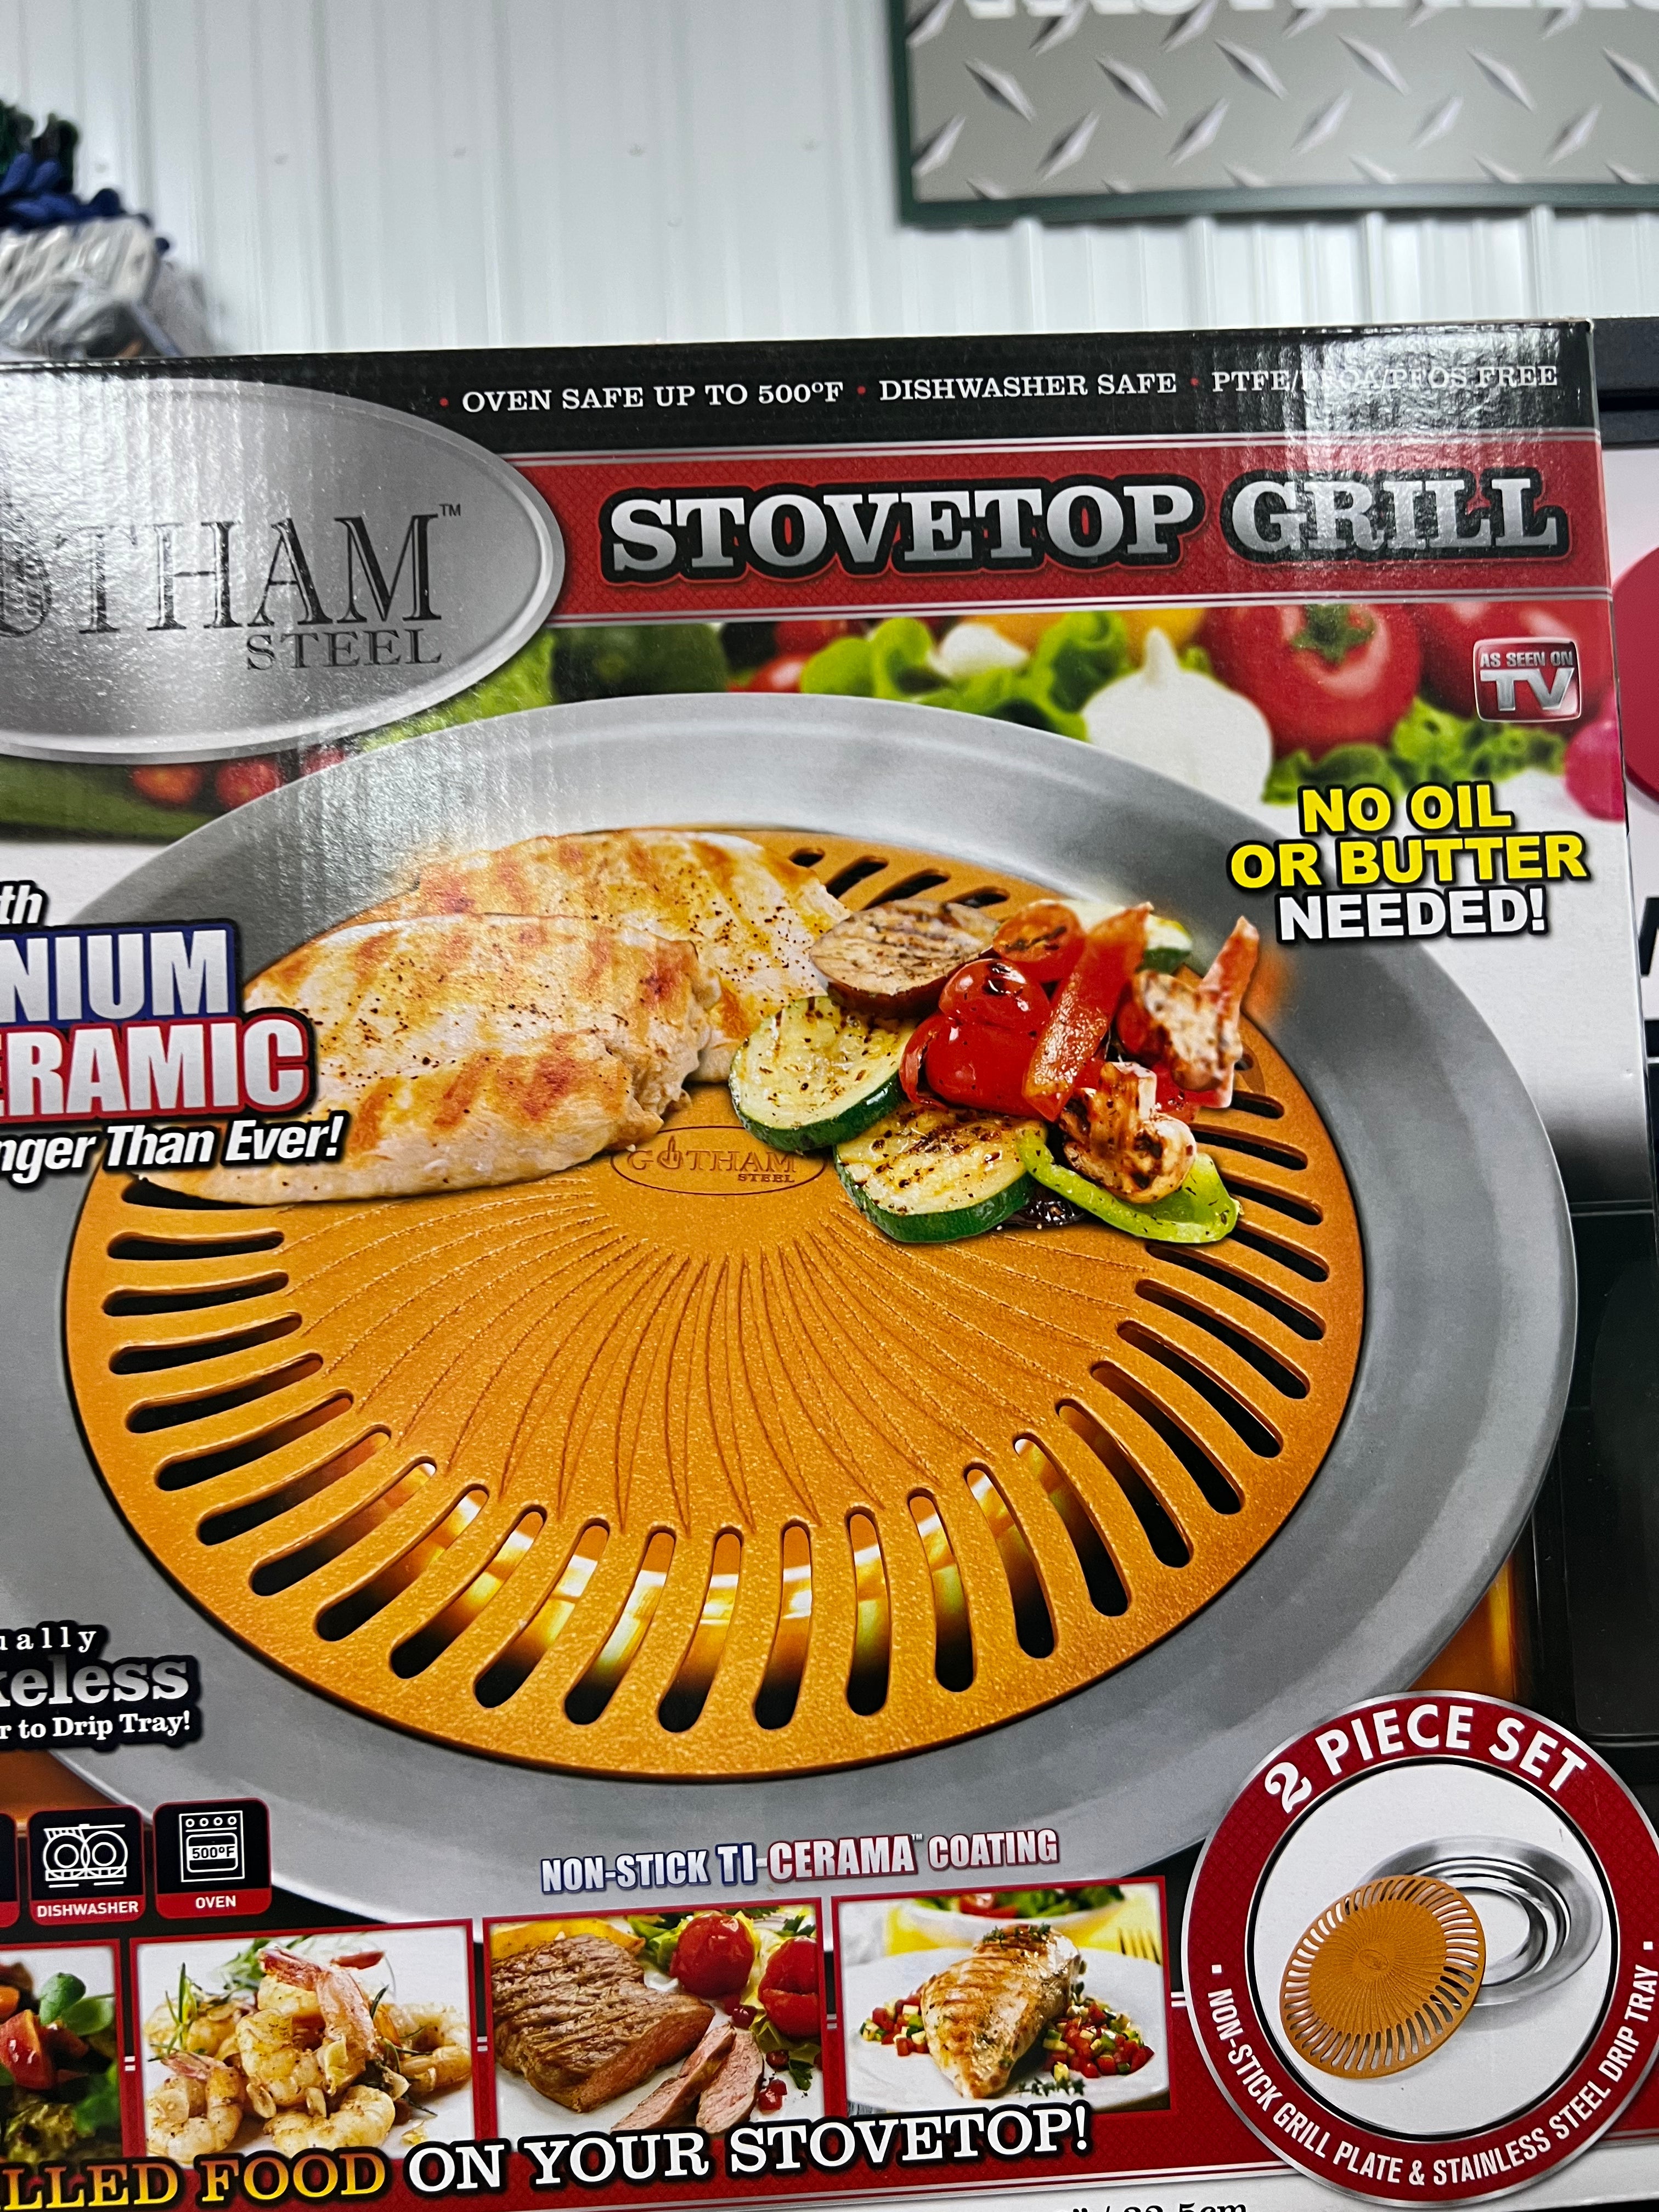 Stovetop grill